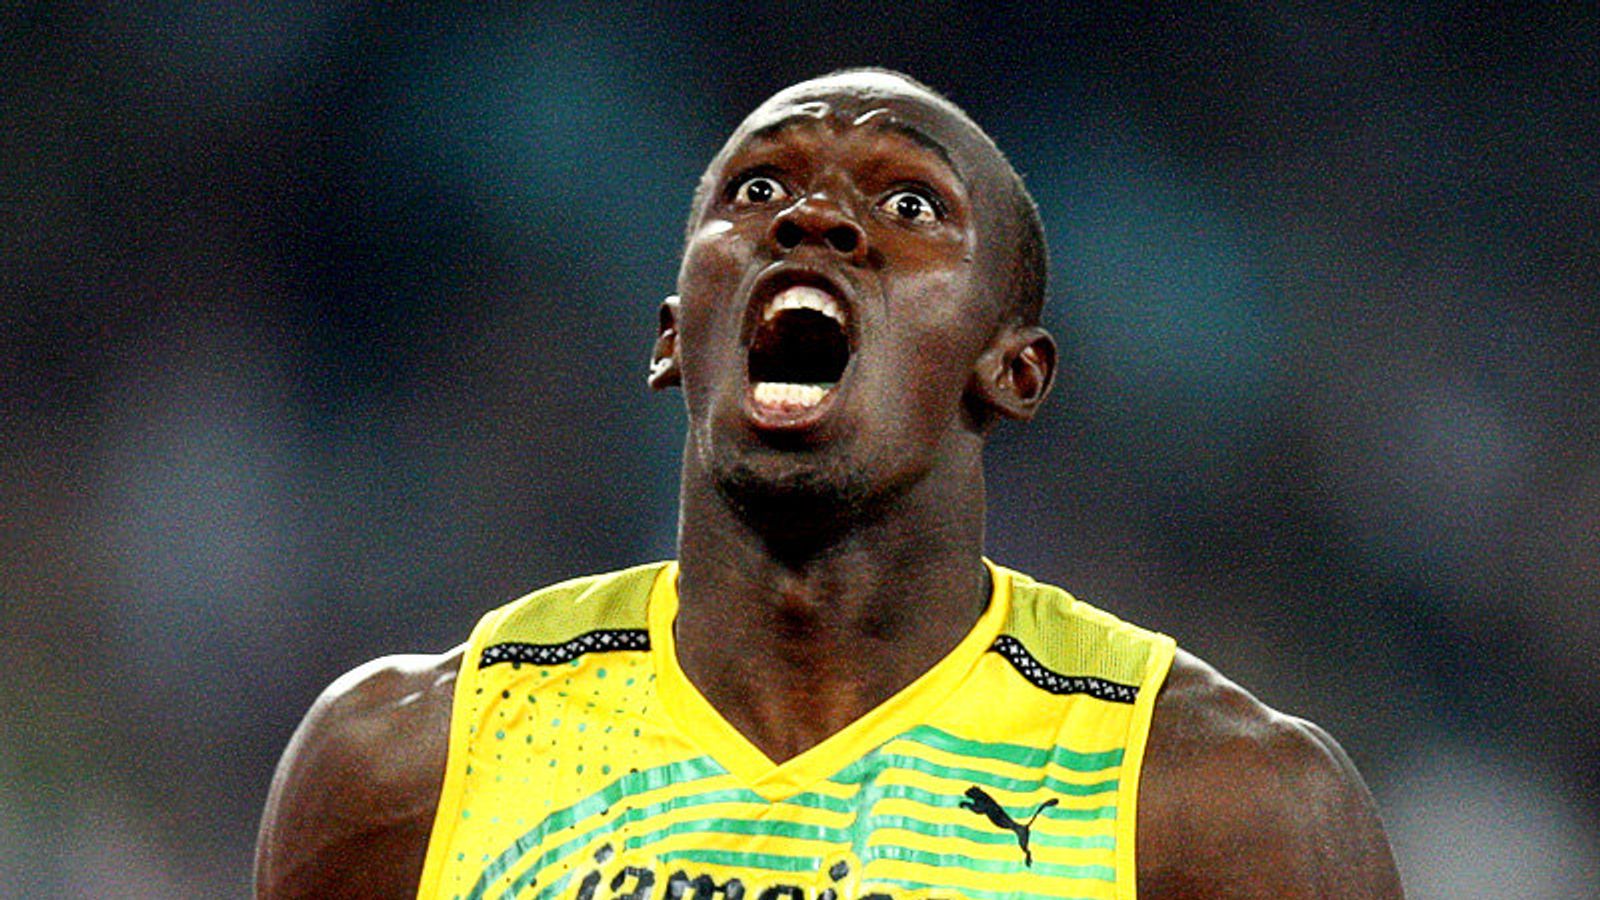 Lightning' strikes thrice as Bolt completes 100m hat-trick - Gulf Times